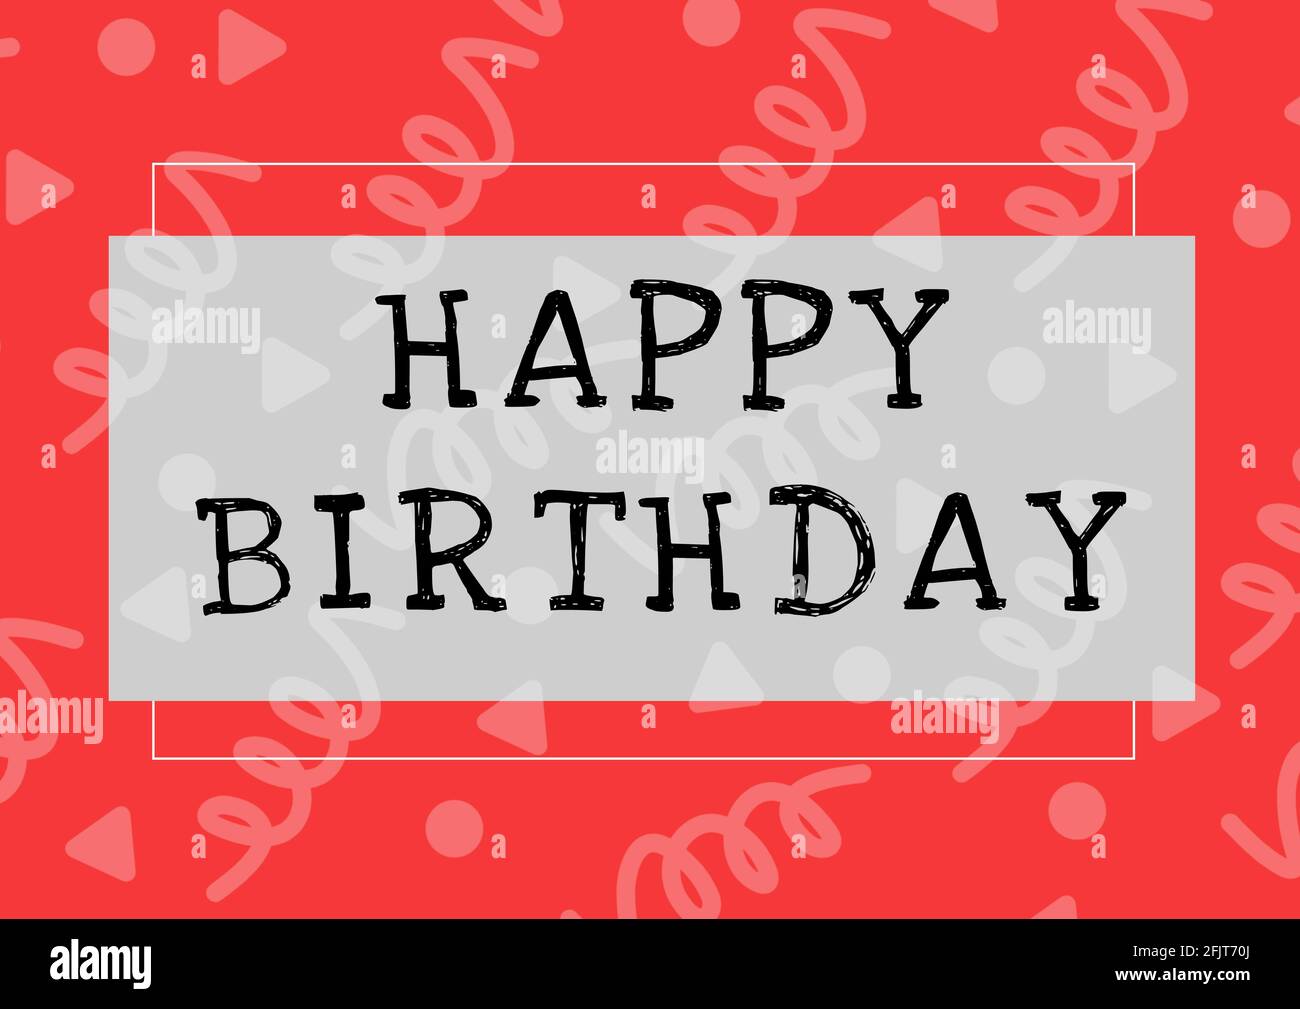 Happy birthday text over grey banner against abstract shapes on red background Stock Photo